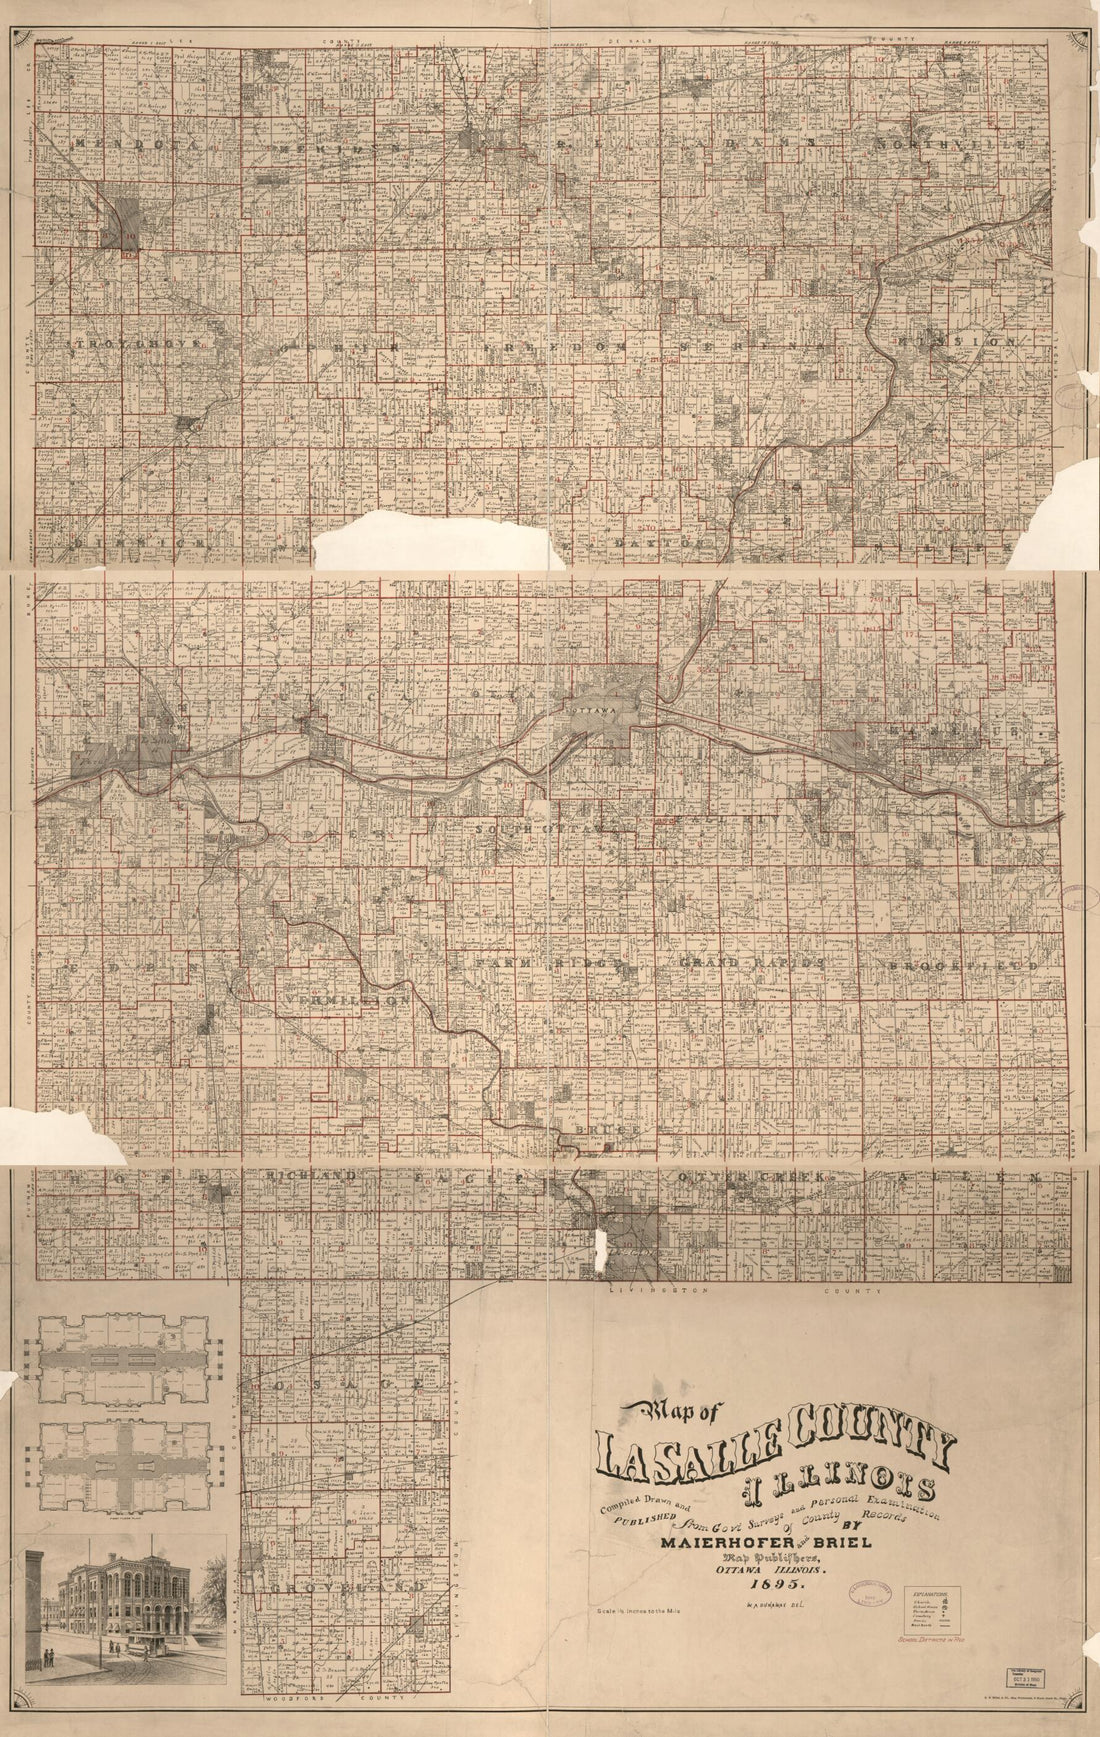 This old map of Map of La Salle County, Illinois from 1895 was created by  Maierhofer and Briel in 1895